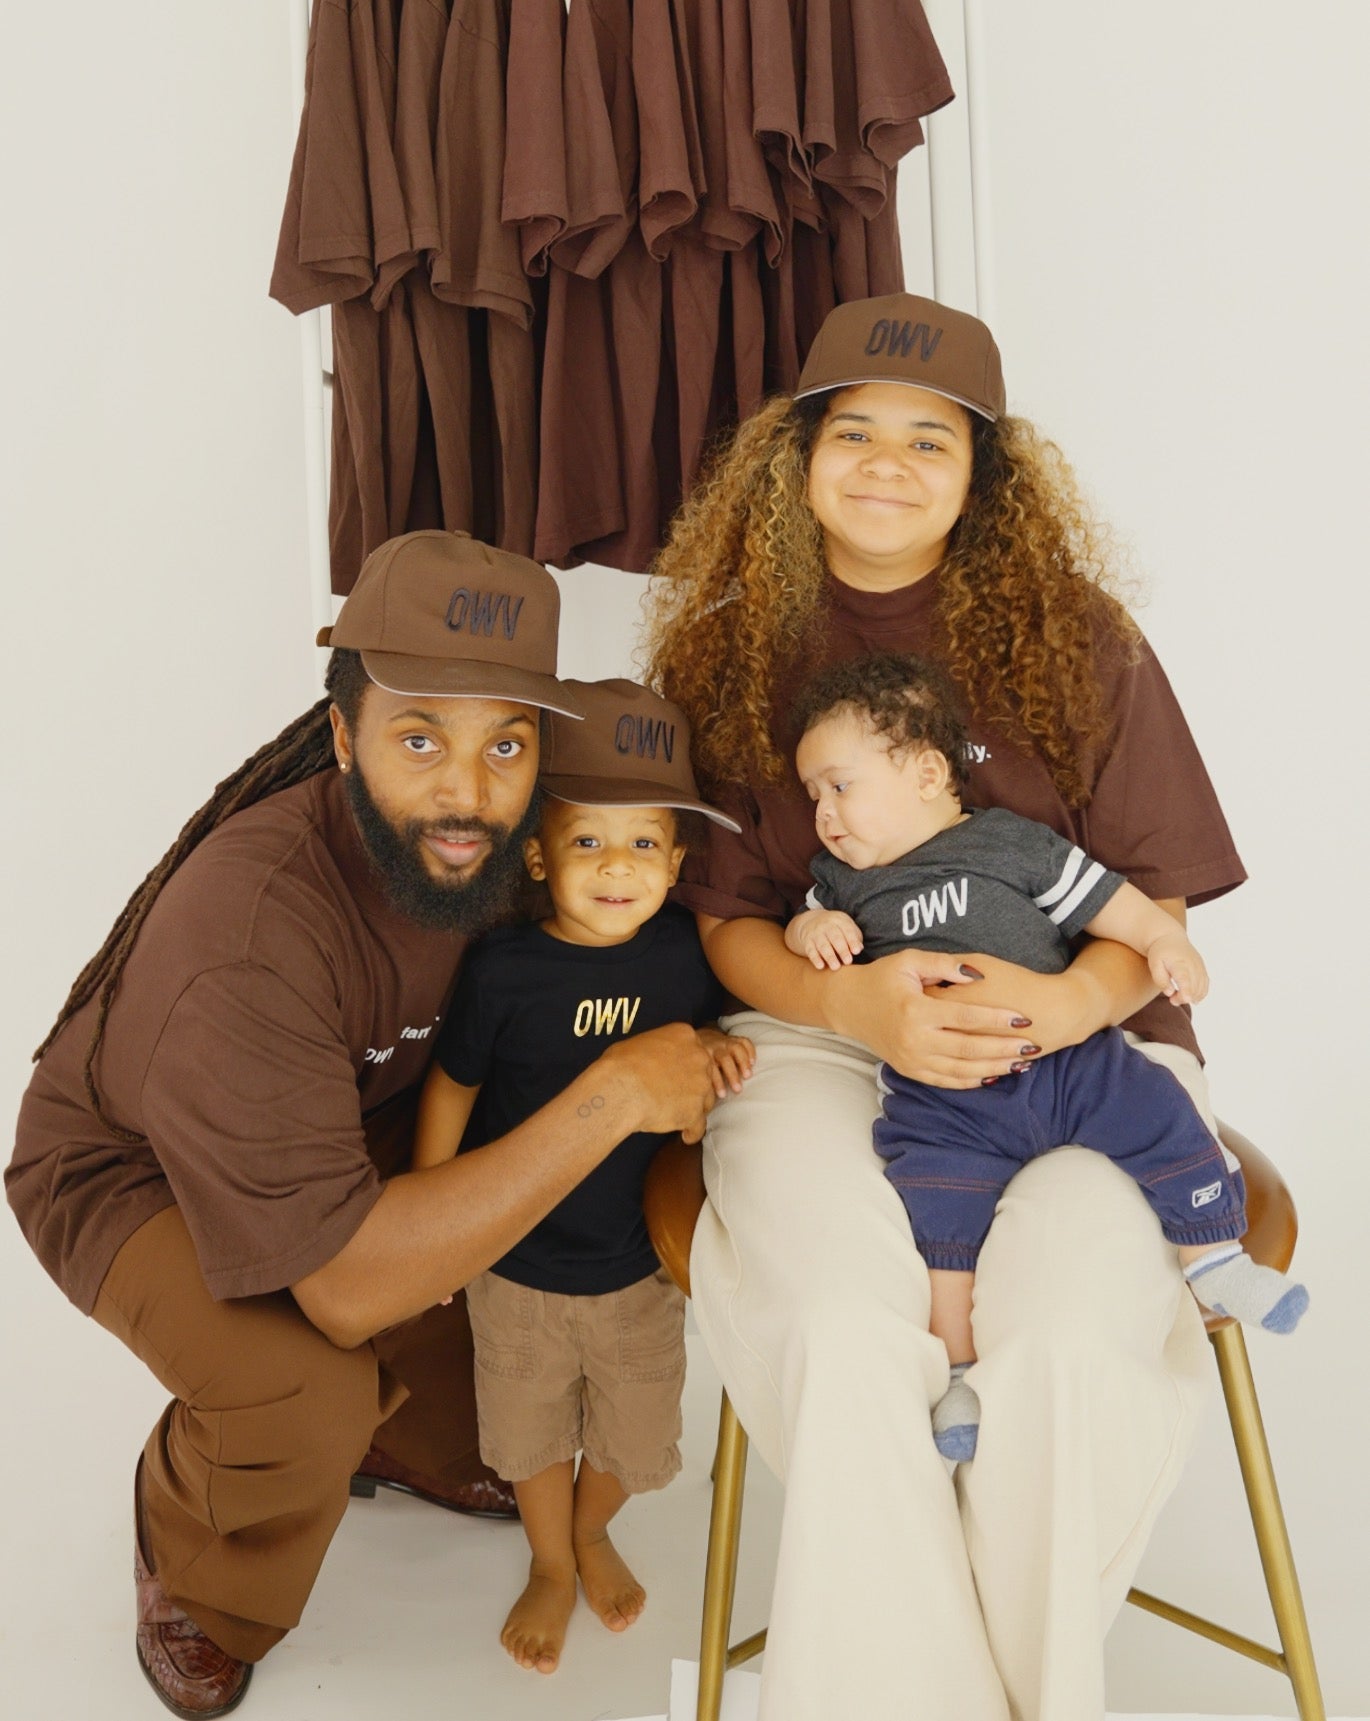 O'Shea, on the left, with his family. O'Shea is wearing an all brown outfit, including a hat with the initials OWV embroidered on it. He's holding his older son, who is wearing an OWV black shirt and a brown hat. On a chair next to them is his wife, whose brown/blonde curly hair is springing out from underneath another brown OWV hat. She's smiling, and holding their infant son, who's wearing a blue outfit and looking at the toddle on the floor next to him. Behind them, a rack of brown shirts hang neatly.